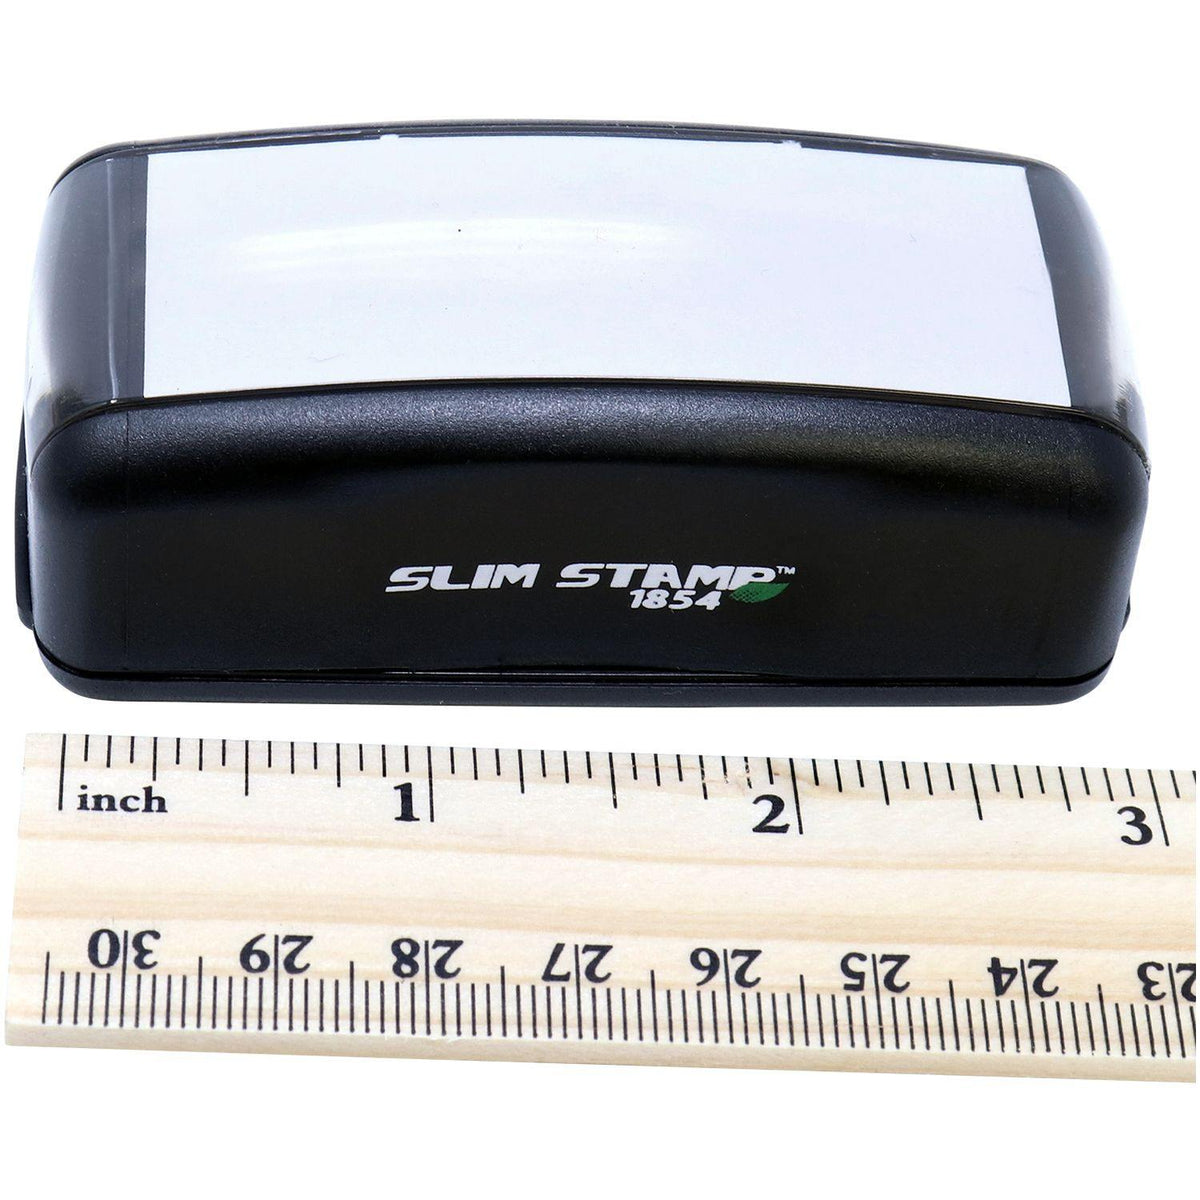 Measurement Large Pre-Inked Two Thumbs Up with Thumb Icon Stamp with Ruler